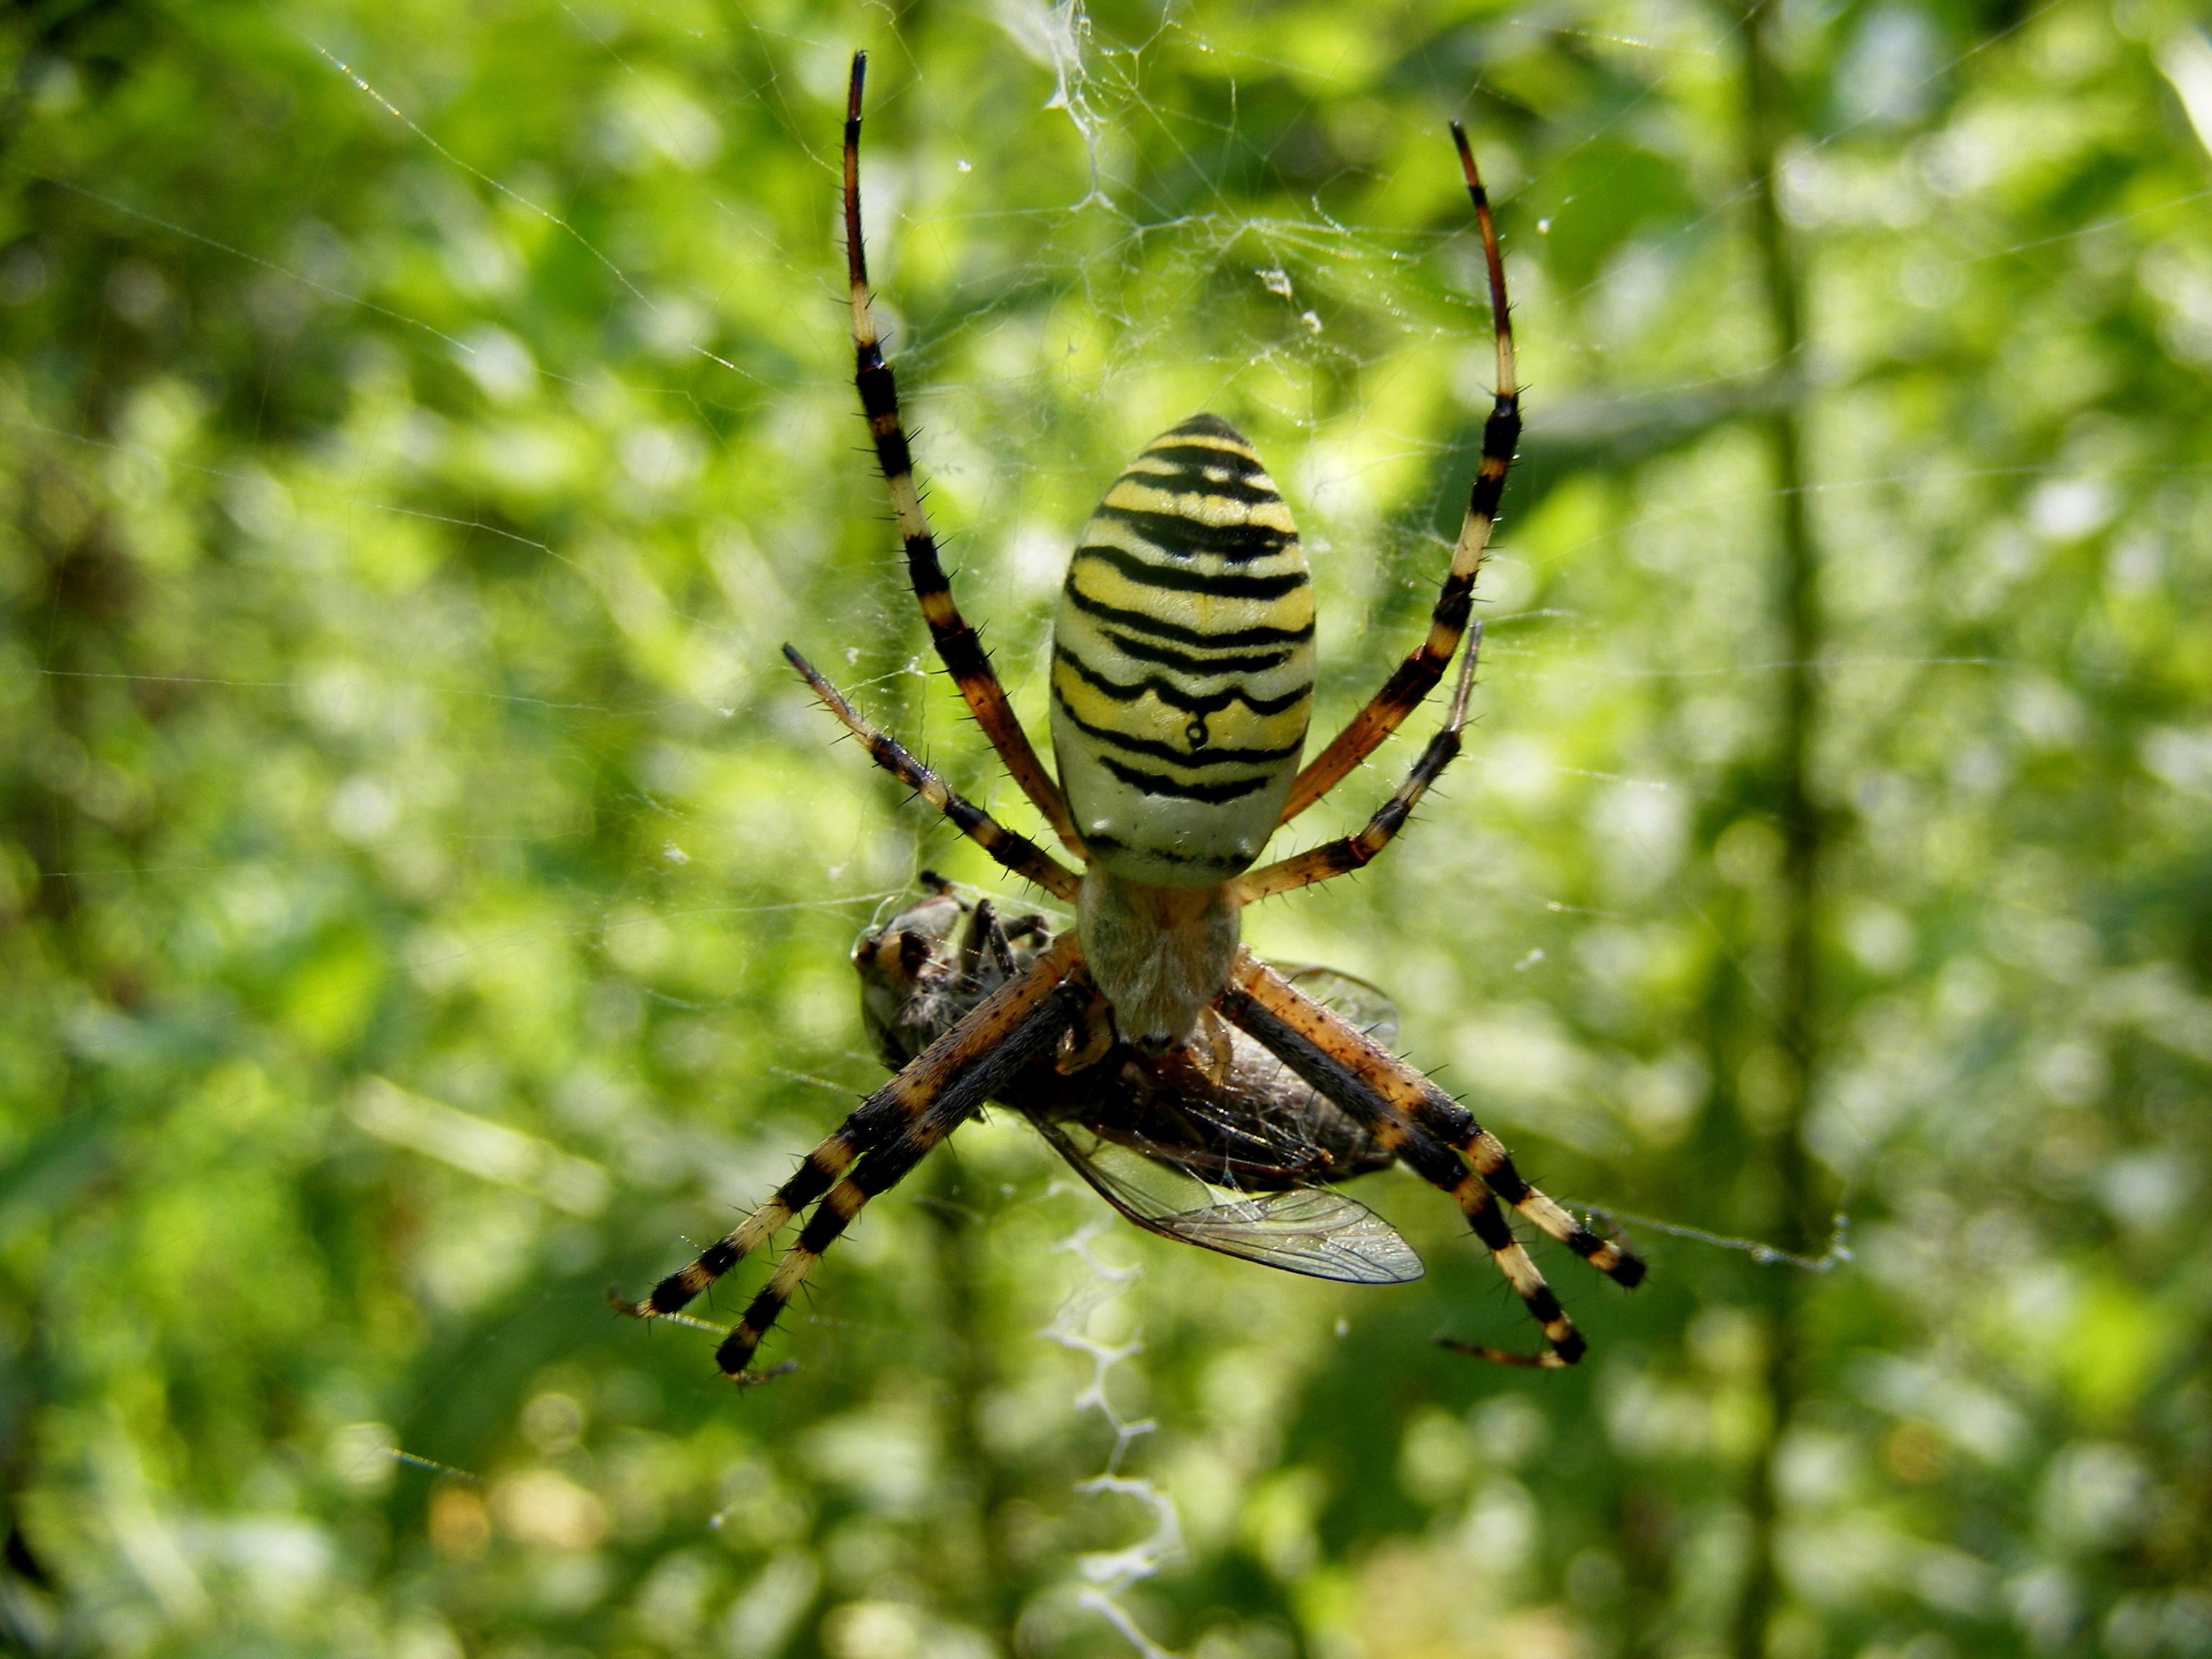 Prey, Animal, Insect, Nature, Spider, HQ Photo